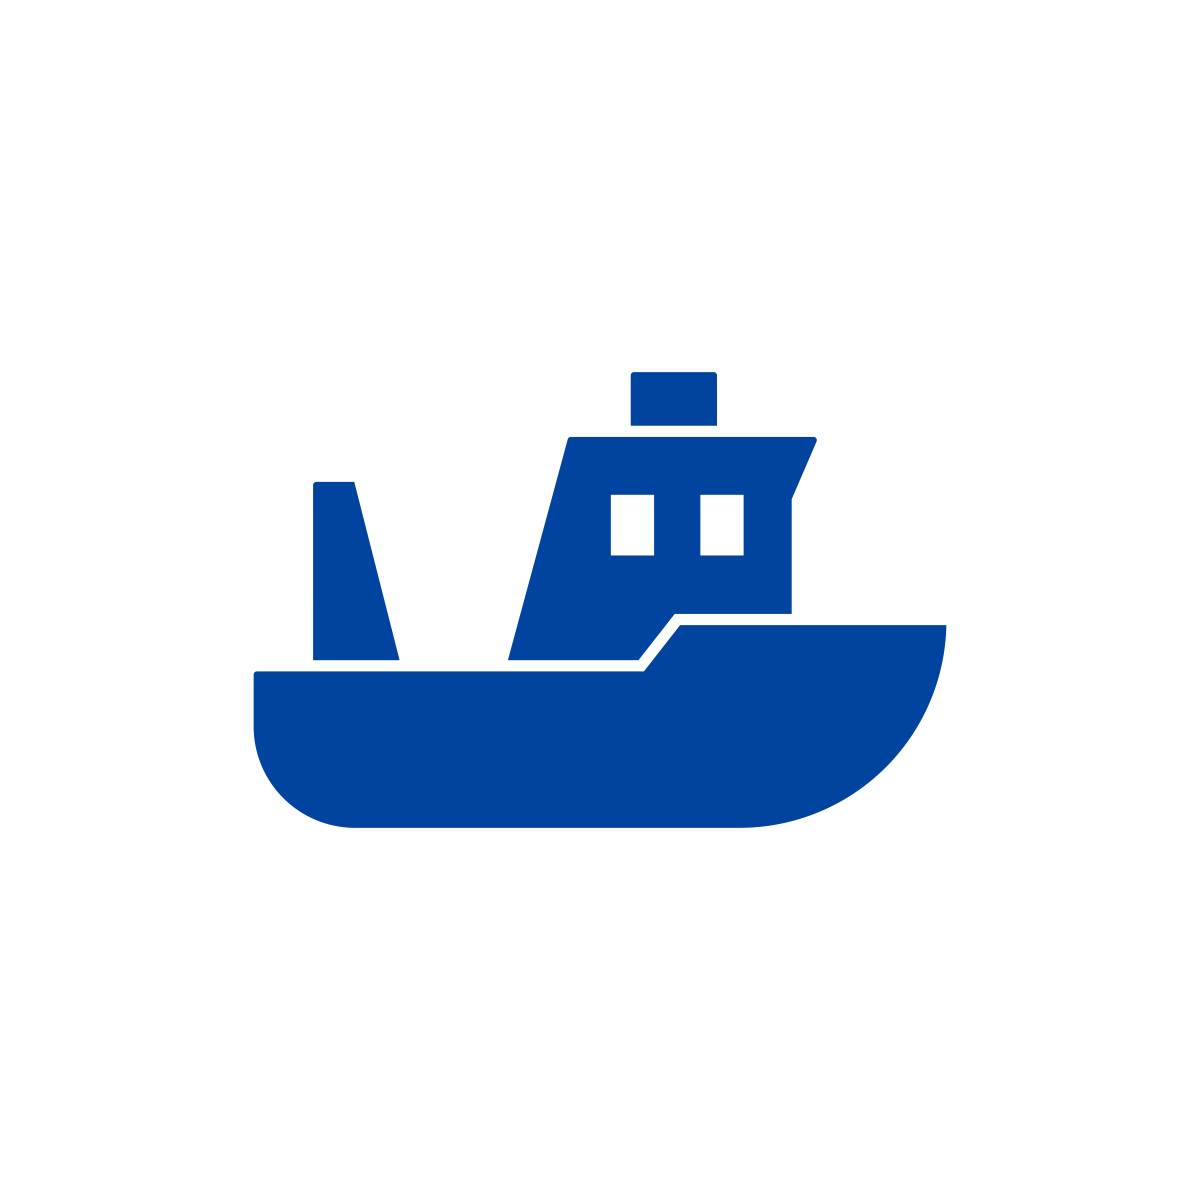 Blue icon of a fishing boat.